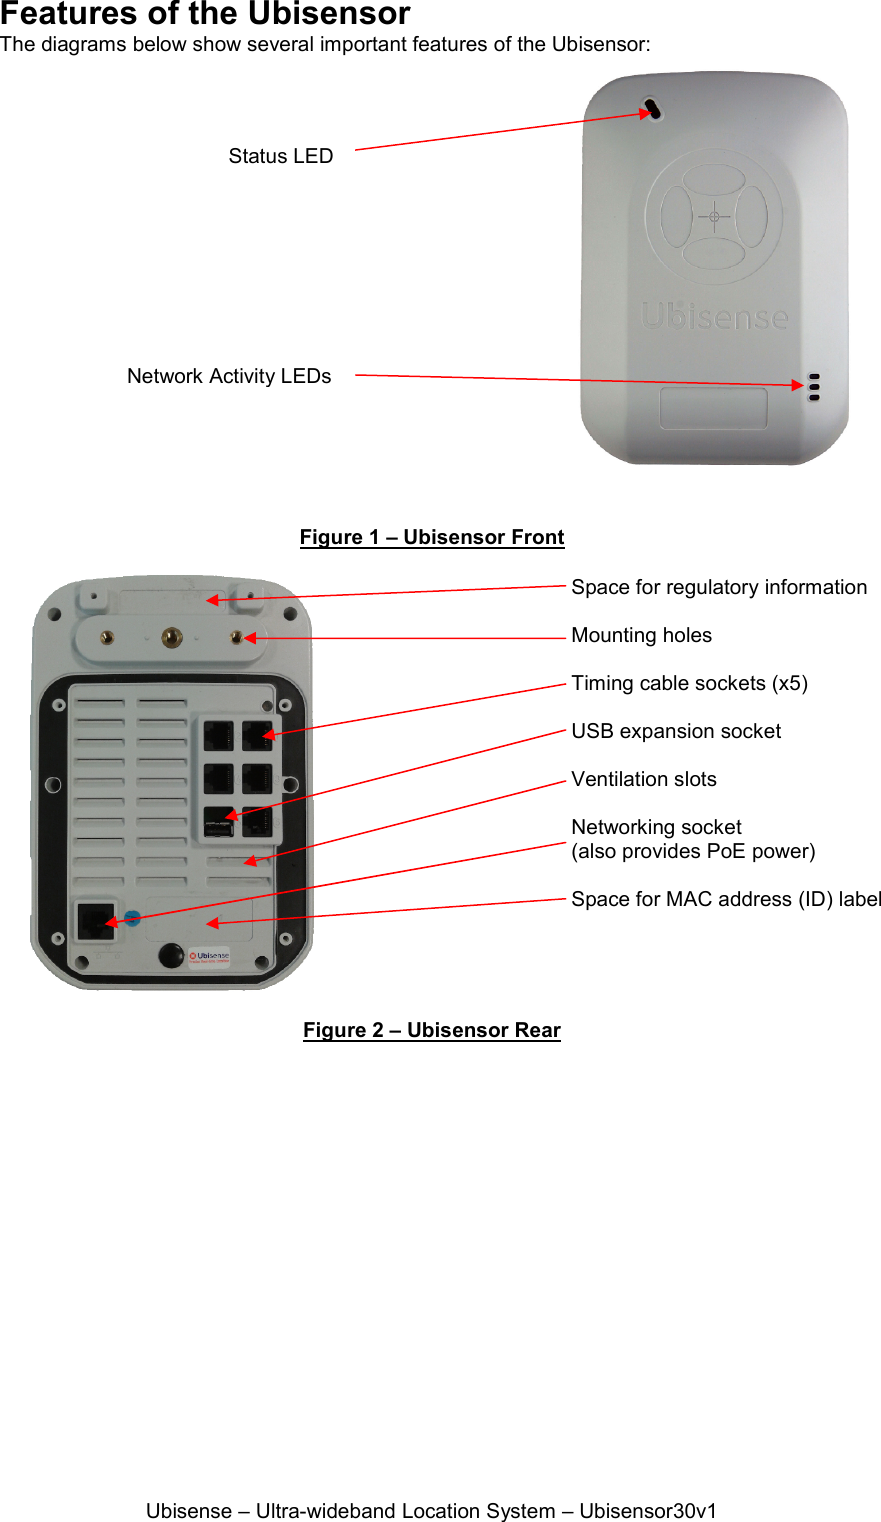 Ubisense – Ultra-wideband Location System – Ubisensor30v1 Features of the Ubisensor The diagrams below show several important features of the Ubisensor:    Figure 1 – Ubisensor Front  Figure 2 – Ubisensor Rear Status LED Space for regulatory information  Mounting holes  Timing cable sockets (x5)  USB expansion socket  Ventilation slots  Networking socket (also provides PoE power)   Space for MAC address (ID) label  Network Activity LEDs 